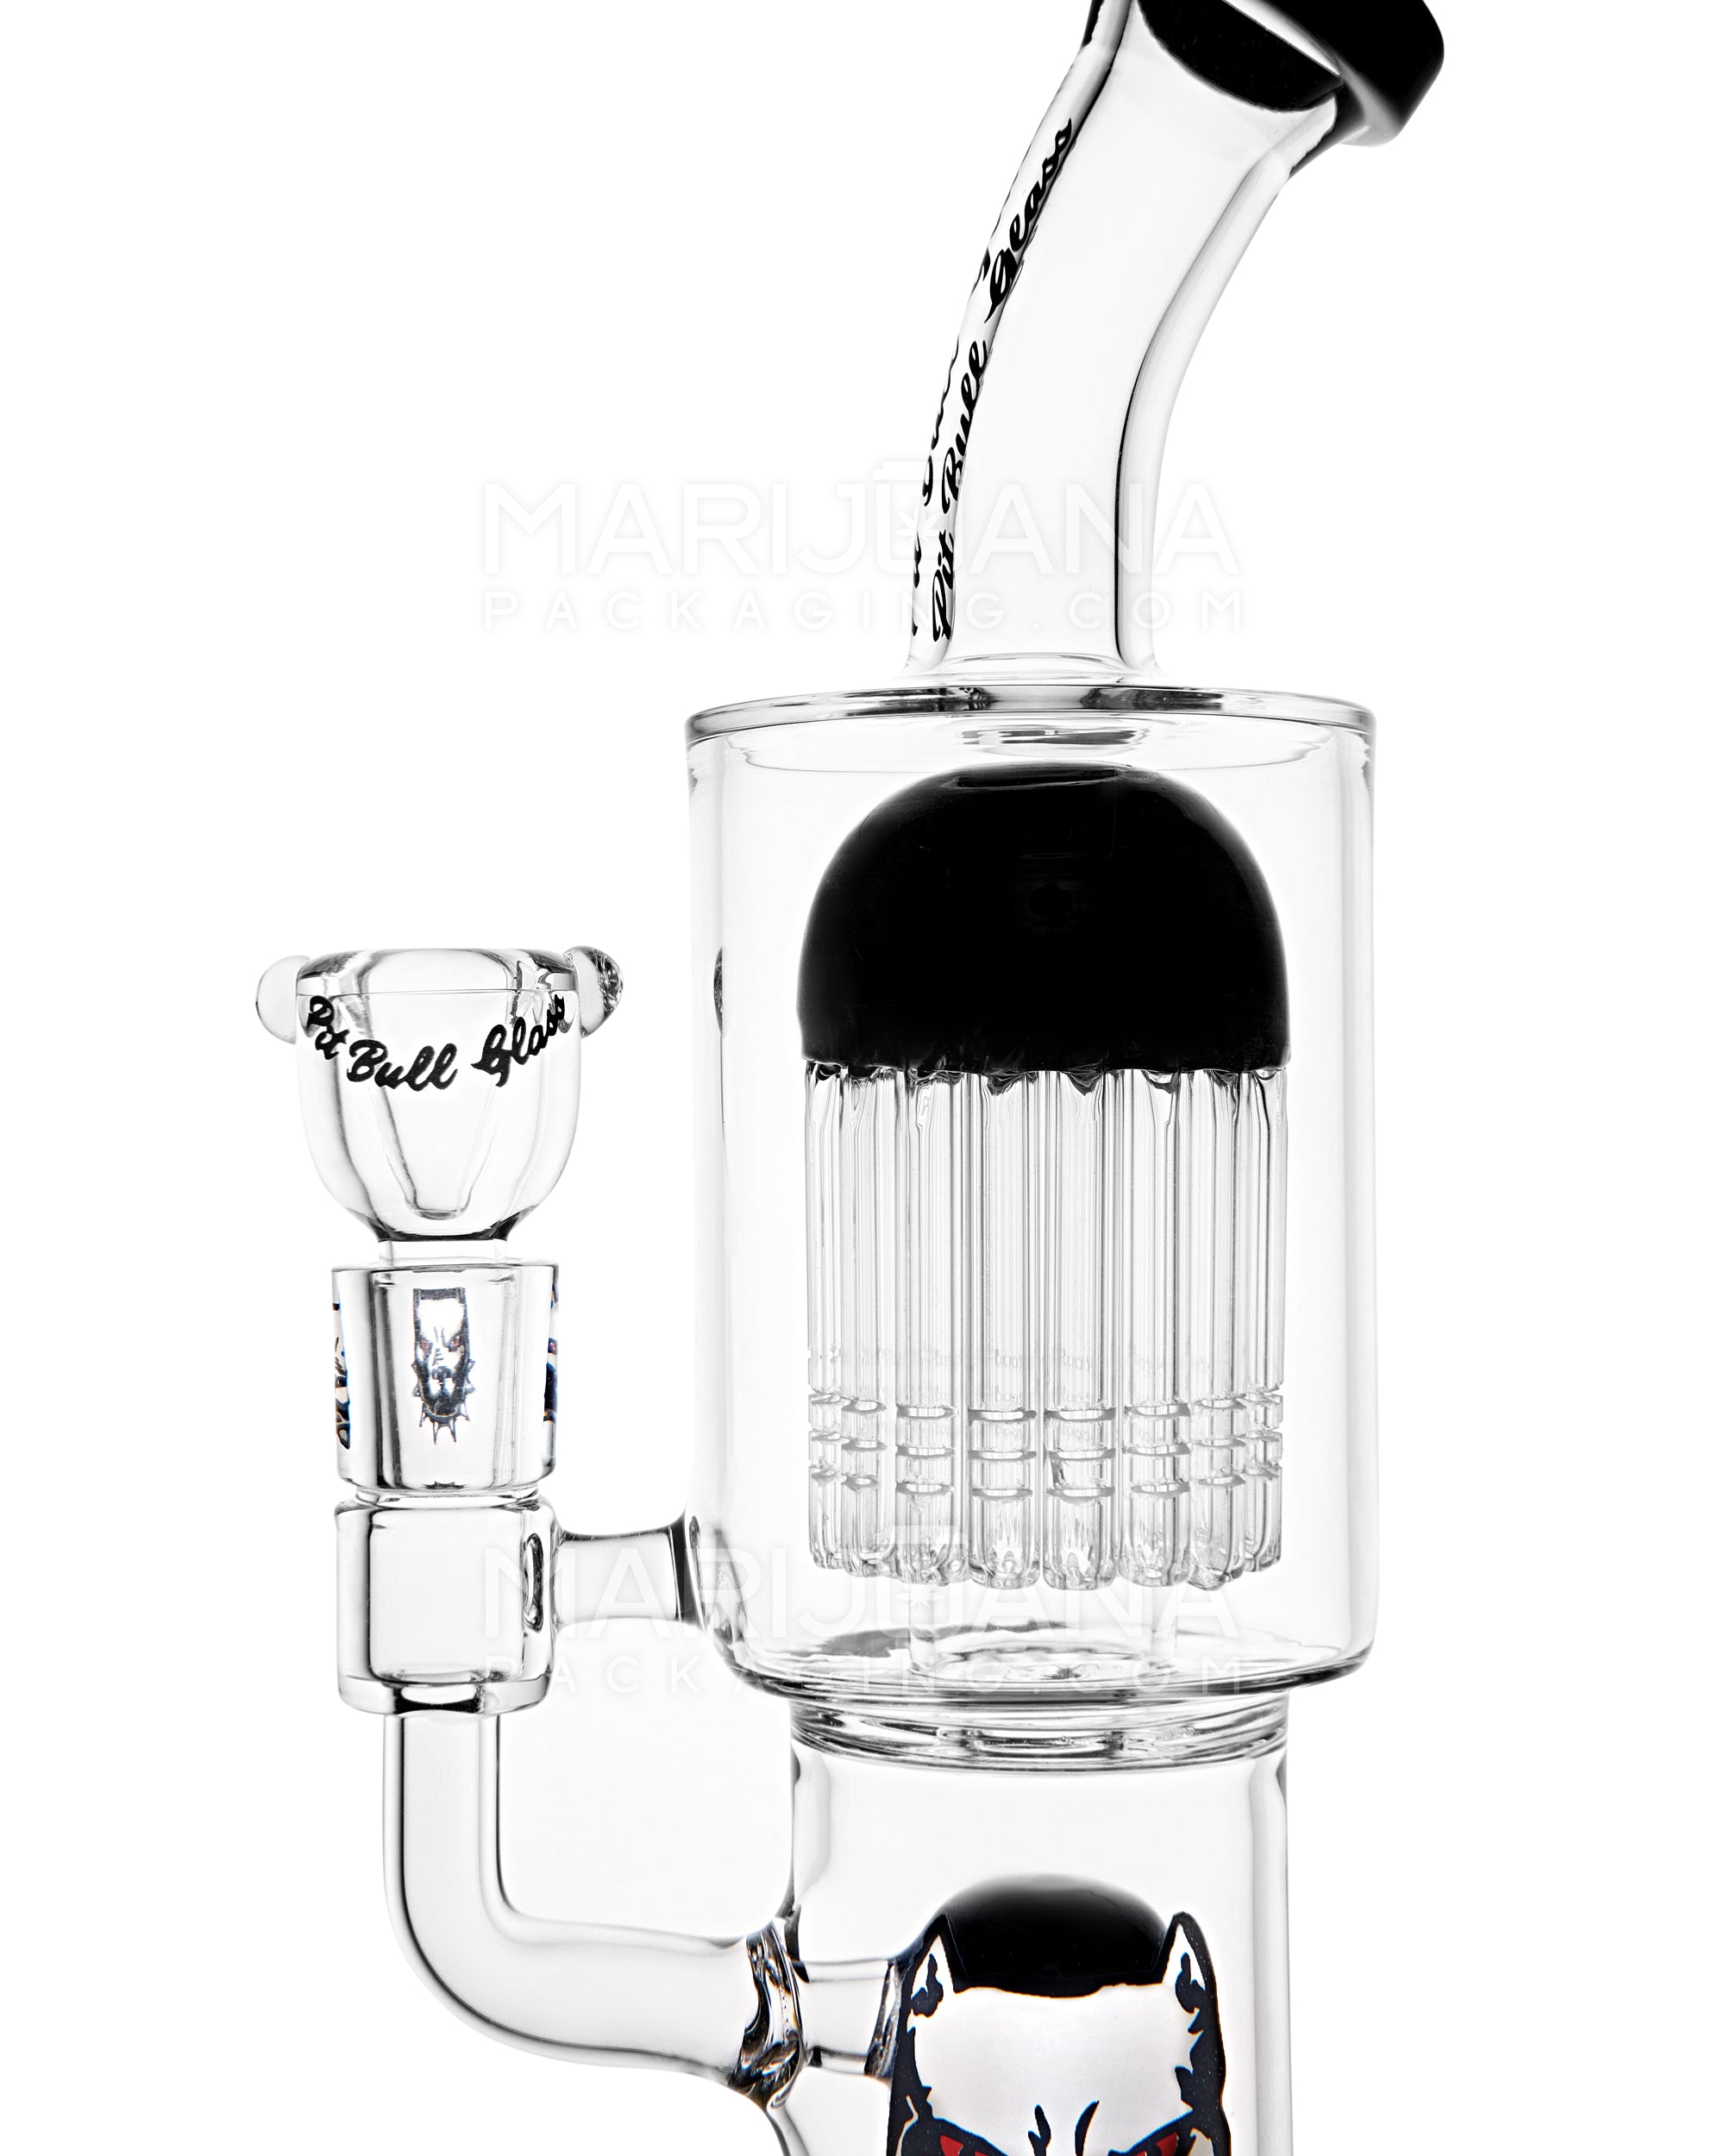 PIT BULL | Bent-Neck Double Tree Perc Glass Water Pipe w/ Thick Base | 12in Tall - 14mm Bowl - Black - 3